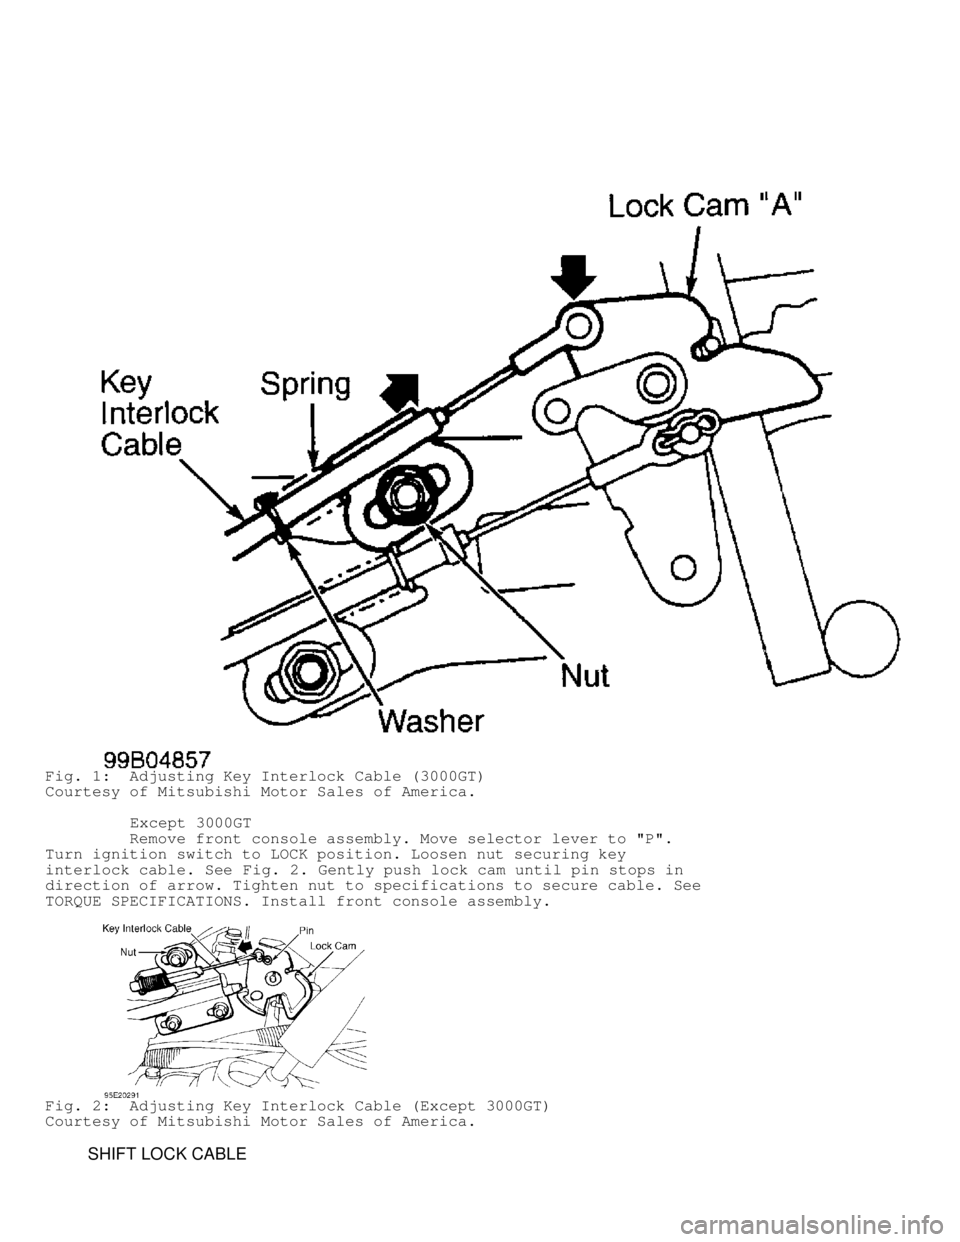 MITSUBISHI MONTERO 1998  Service Manual Fig. 1:  Adjusting Key Interlock Cable (3000GT)
Courtesy of Mitsubishi Motor Sales of America.
         Except 3000GT
         Remove front console assembly. Move selector lever to "P".
Turn ignition 